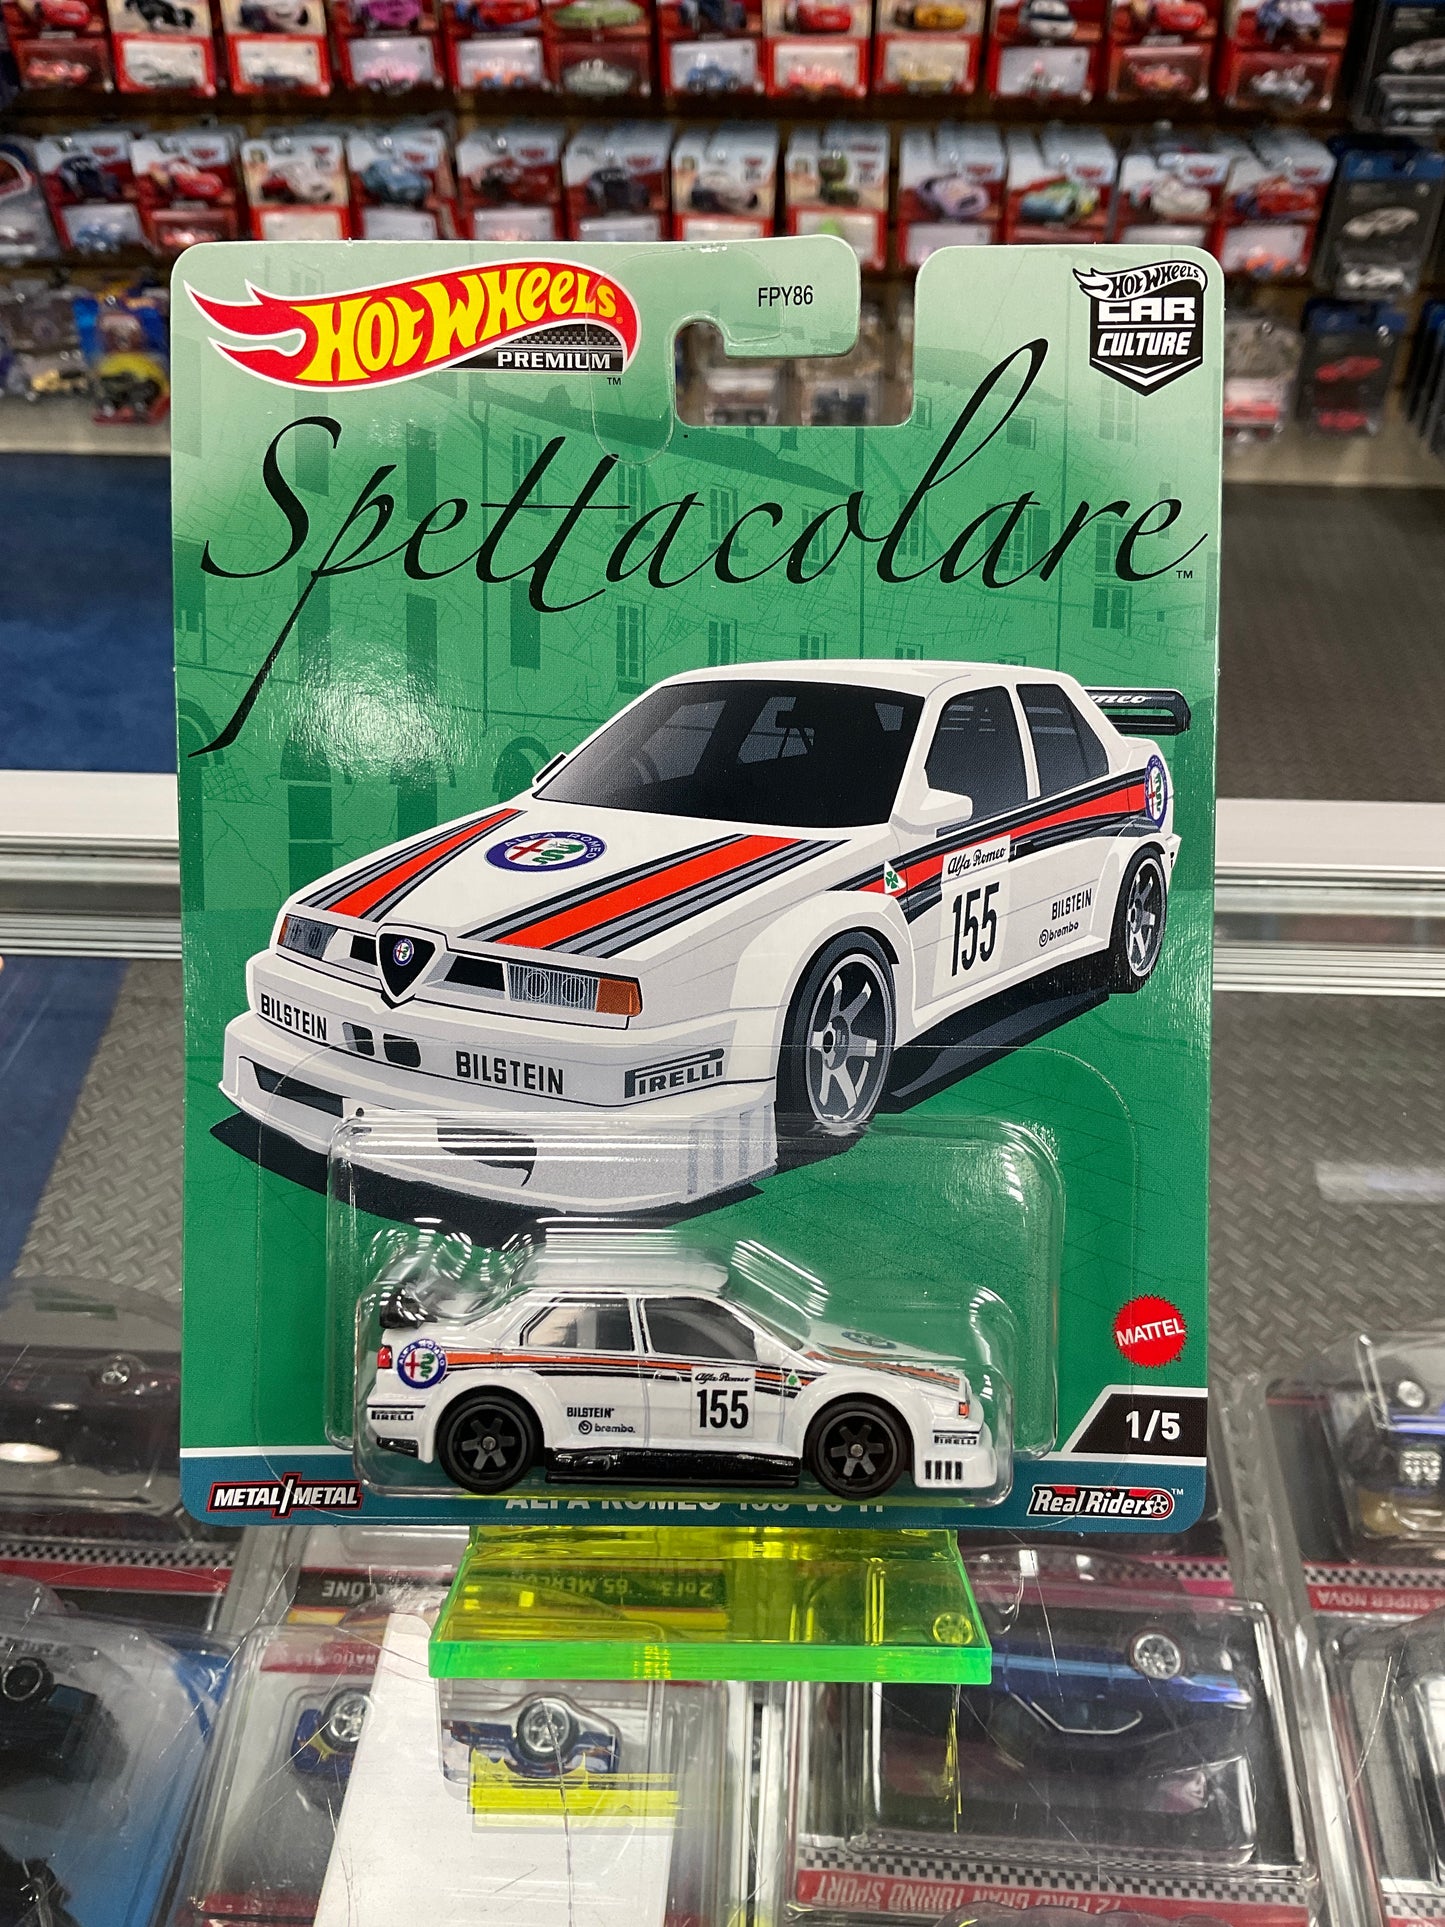 Hot wheels Spettacolare set with Chase